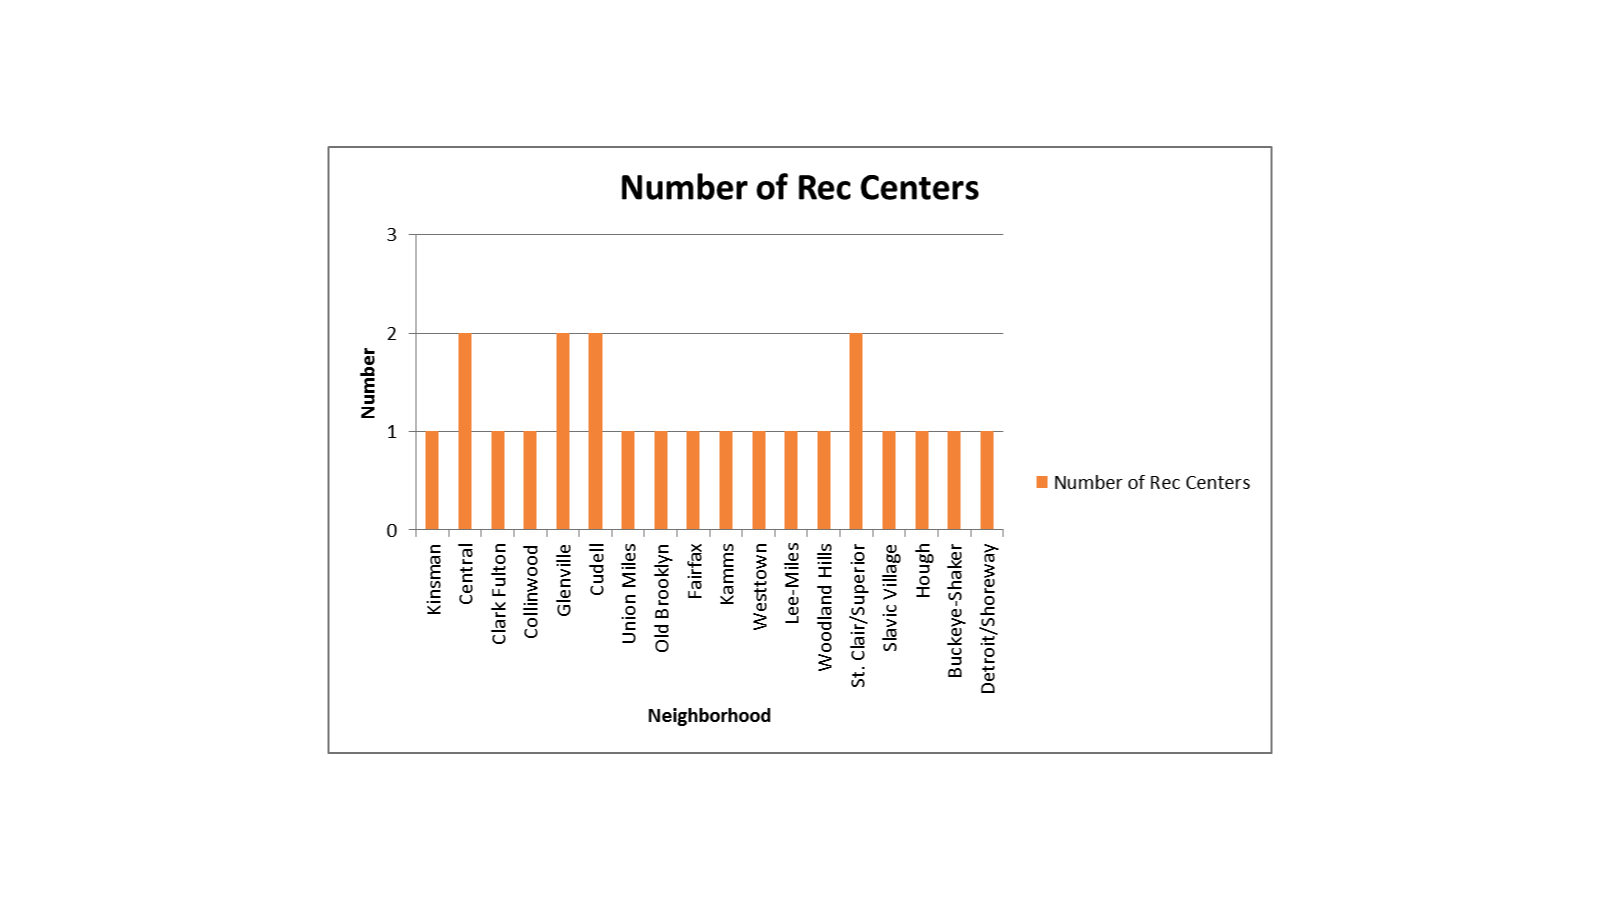 Cleveland Rec Centers by Neighborhood.png